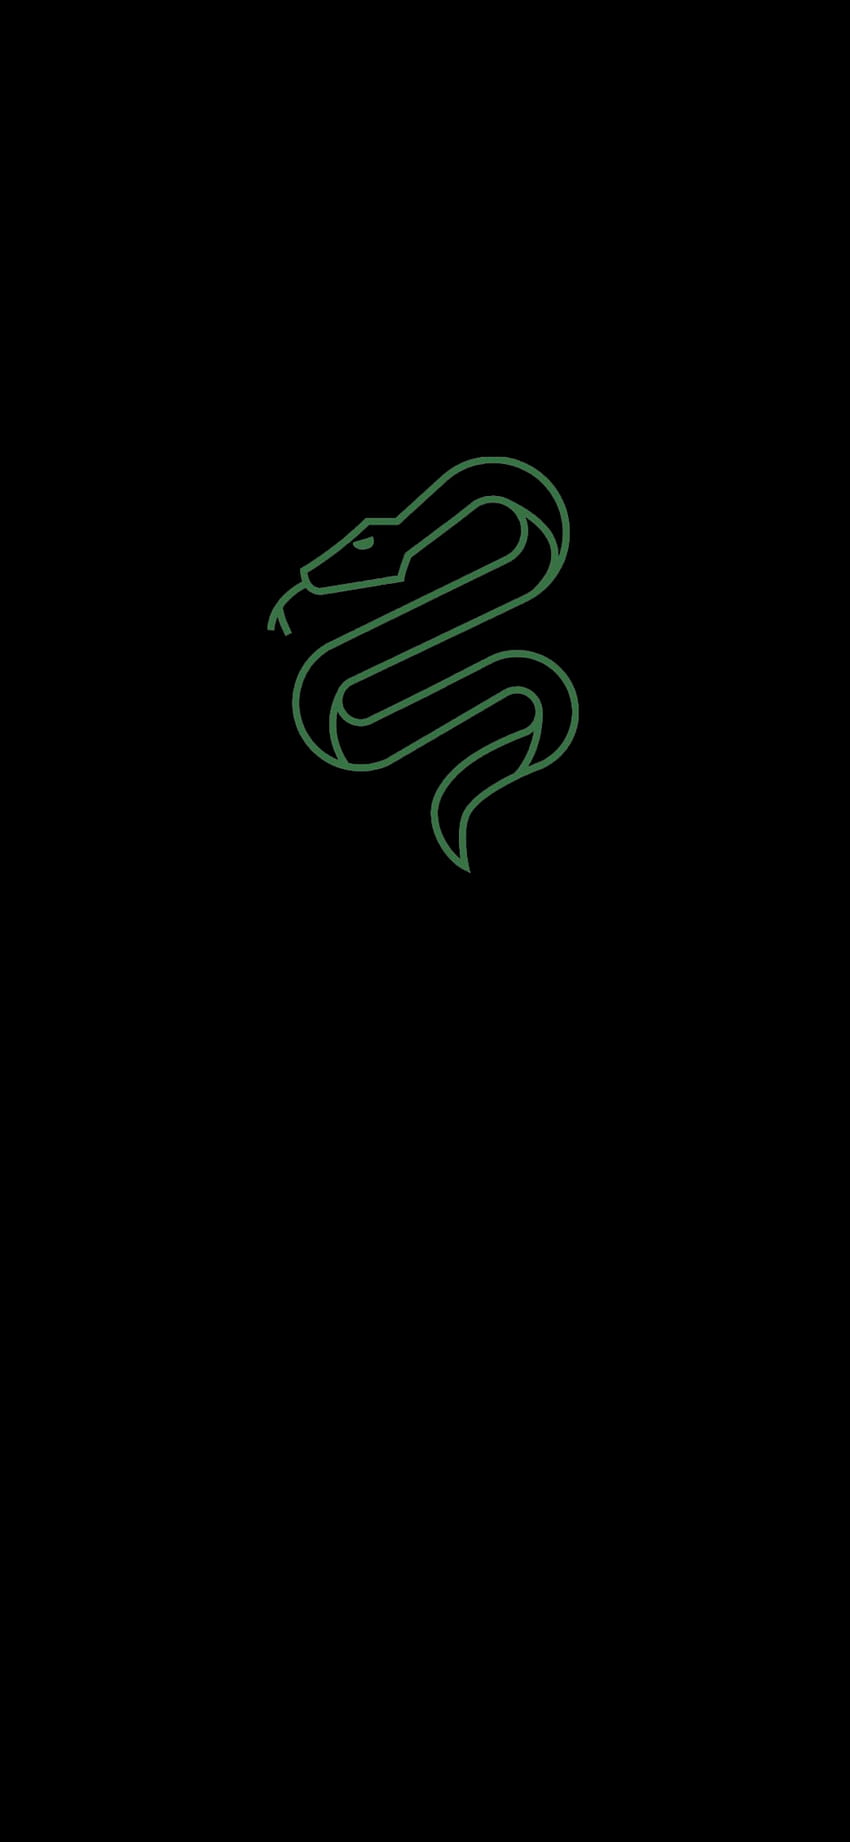 Made this minimalistic Slytherin, Cool Slytherin HD phone wallpaper